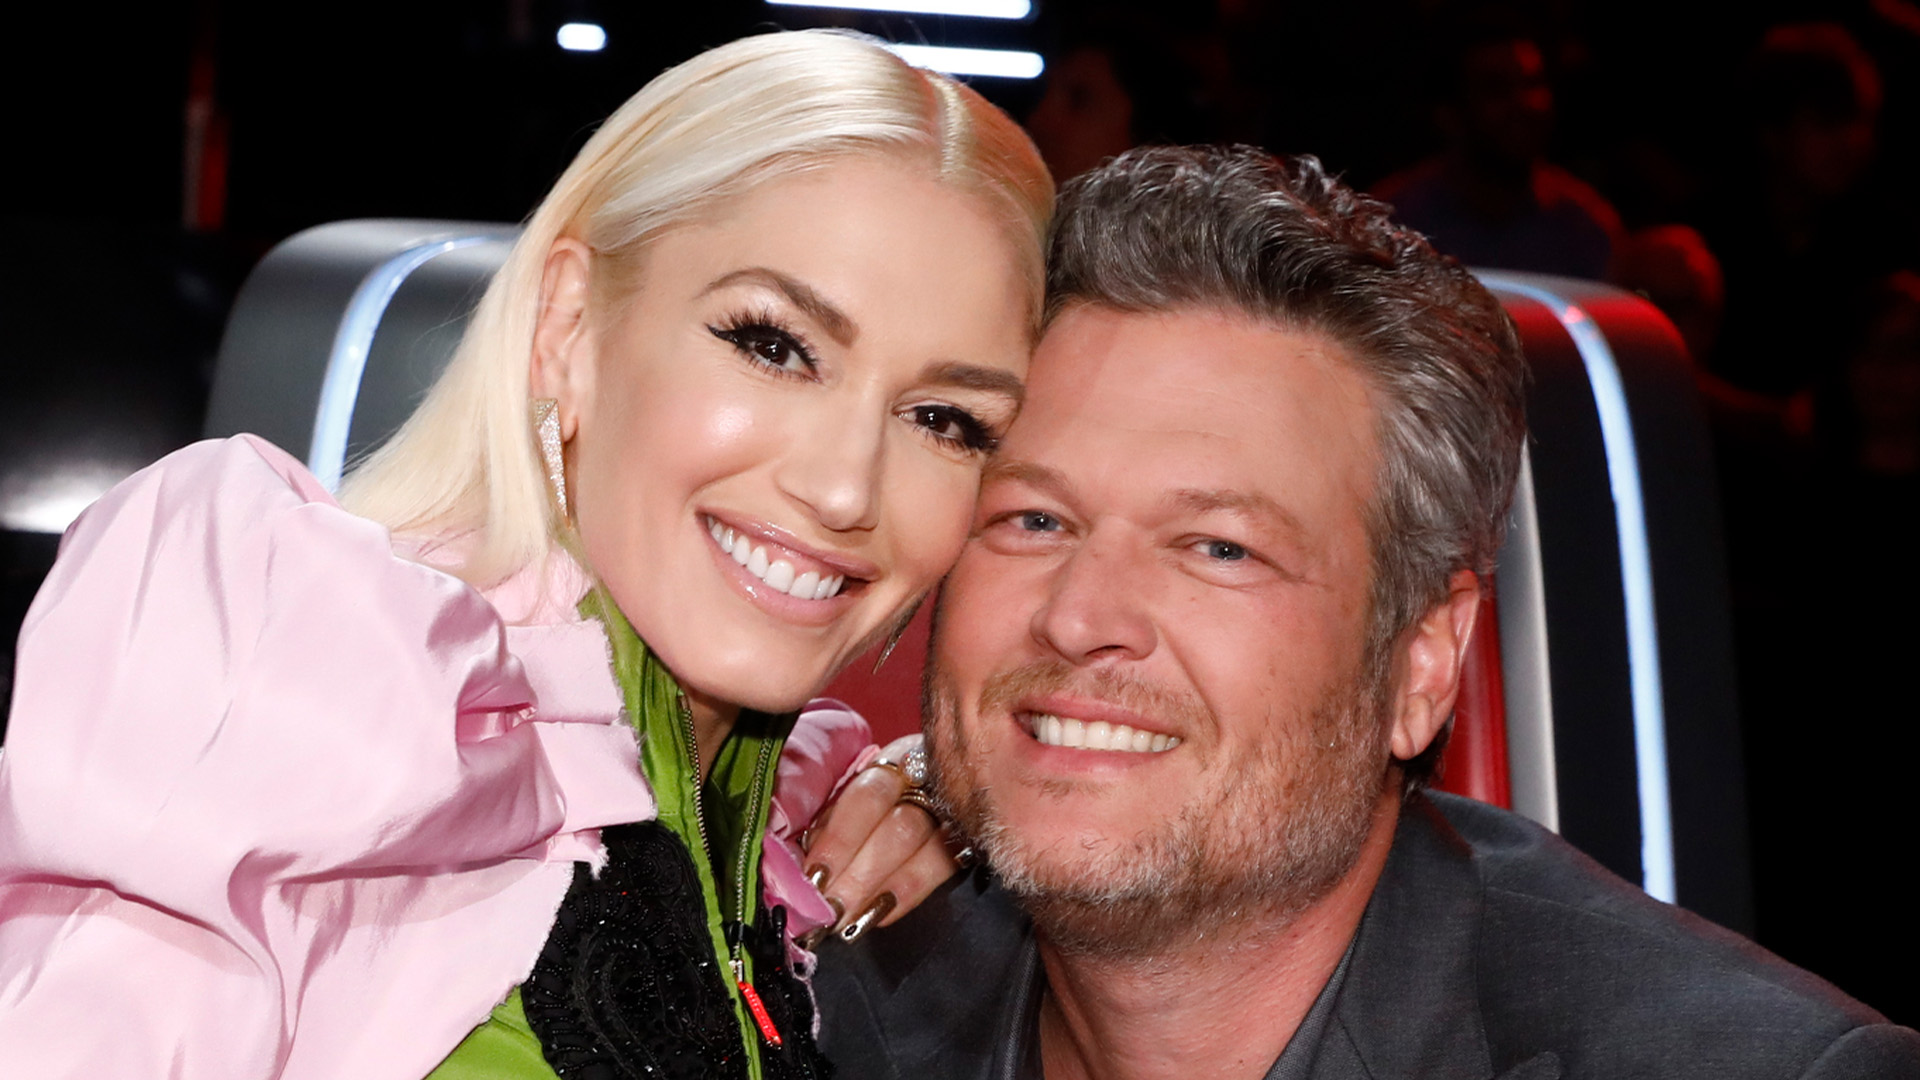 Gwen Stefani kisses and cuddles up to A-list male singer as fans speculate marriage issues with husband Blake Shelton